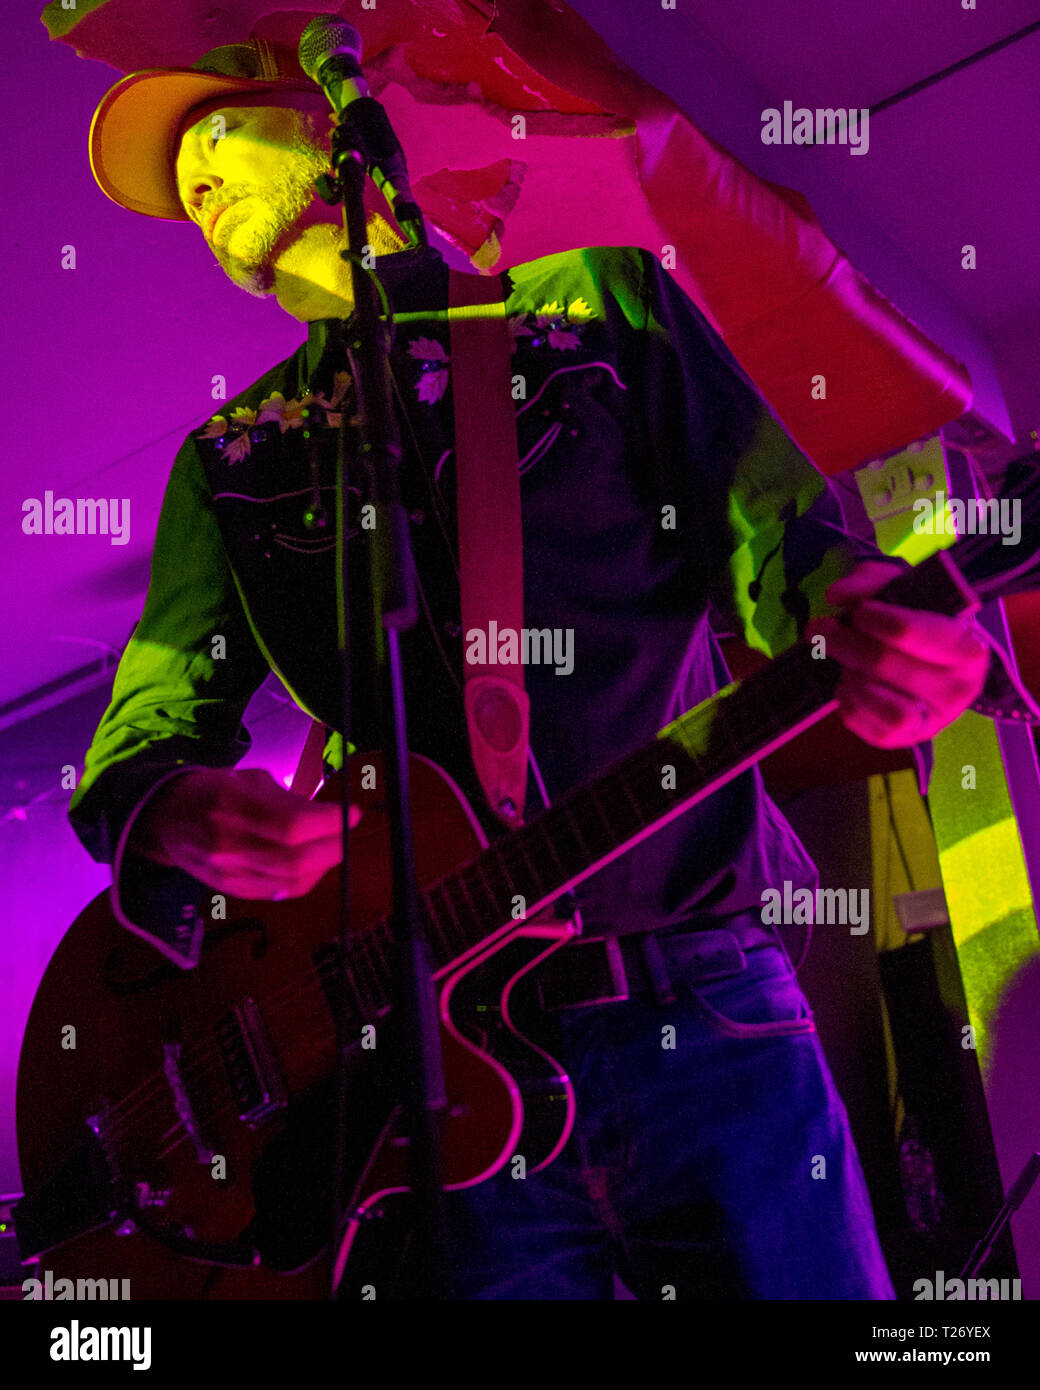 Glasgow, UK. 29 March 2019. The Reverse Cowgirls, in concert, performing psych-tinched garage rock music at a packed Broadcast in Glasgow.  PICURED: Hugh Mclachlan  Band Members: Hugh Mclachlan - Singer Stephen Cafferty - Guitar Alaine Walls -  Bass John Gordon - Drums Credit: Colin Fisher/Alamy Live News Stock Photo